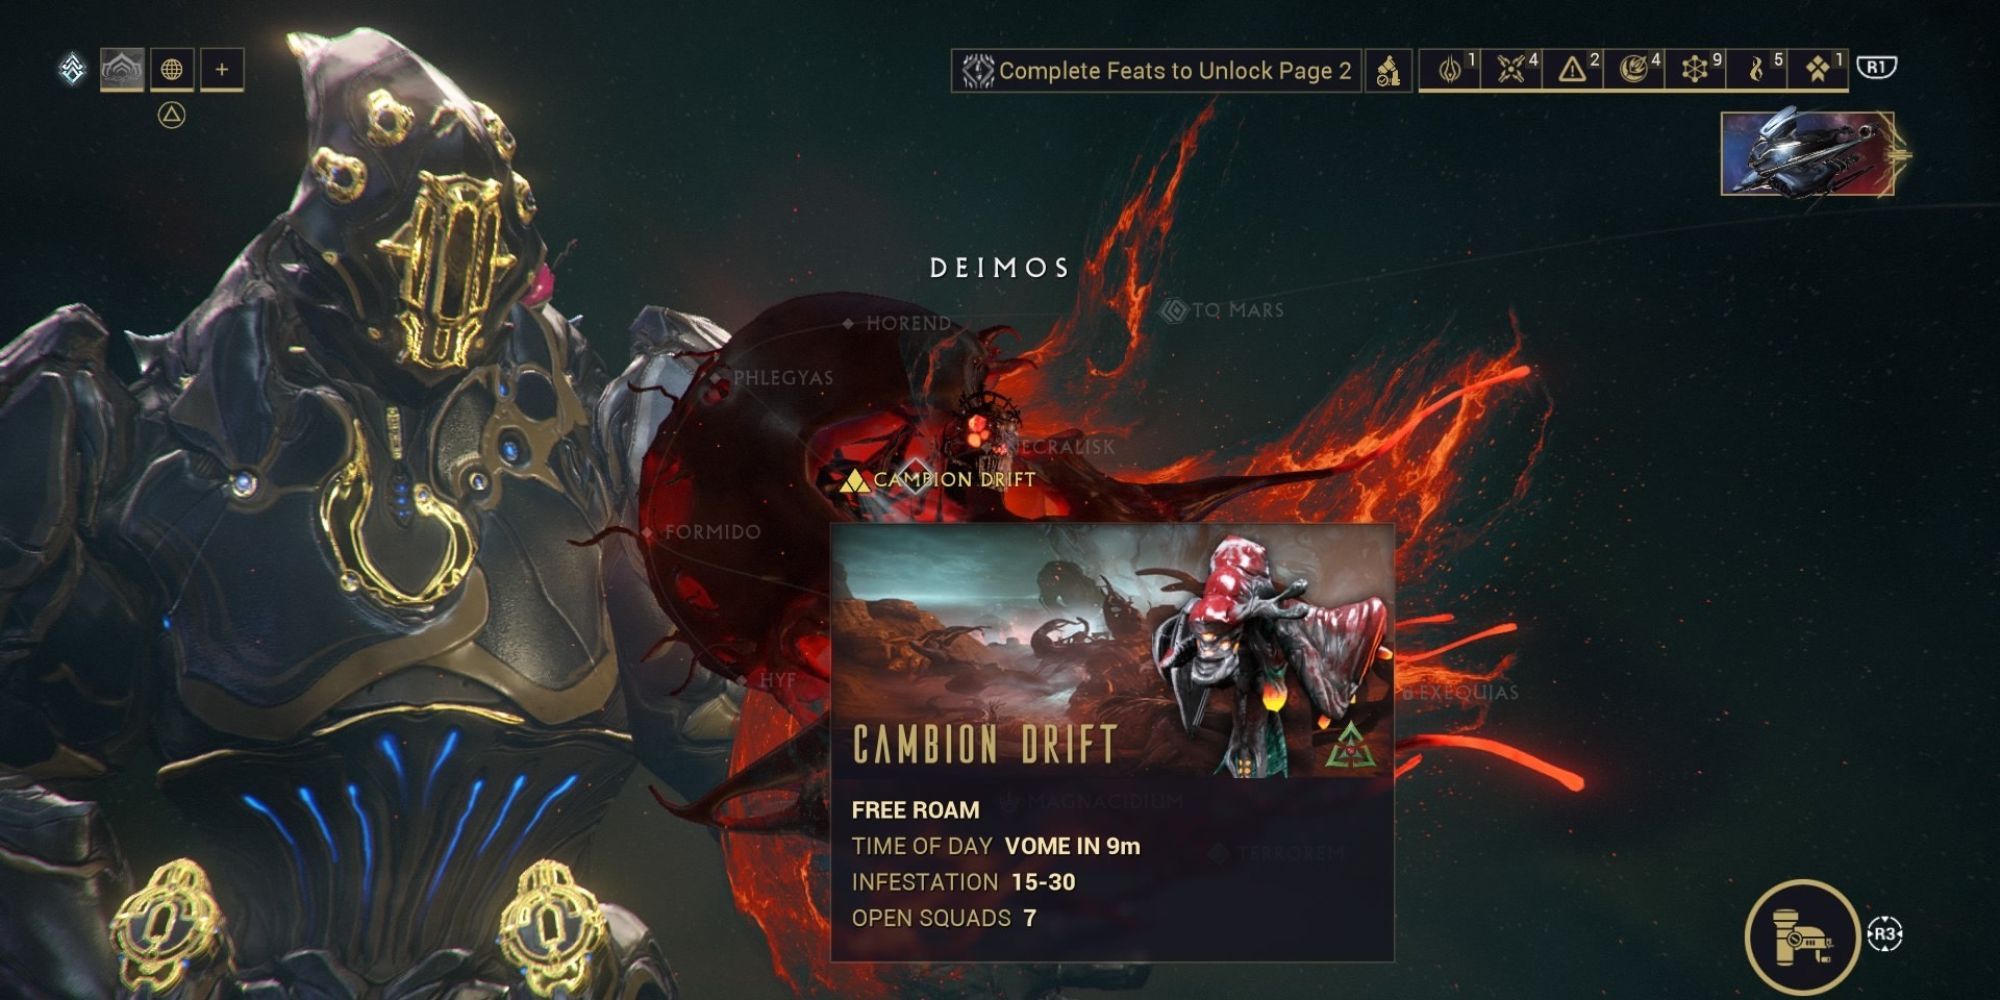 The Cambion Drift node on the Warframe Deimos mission list